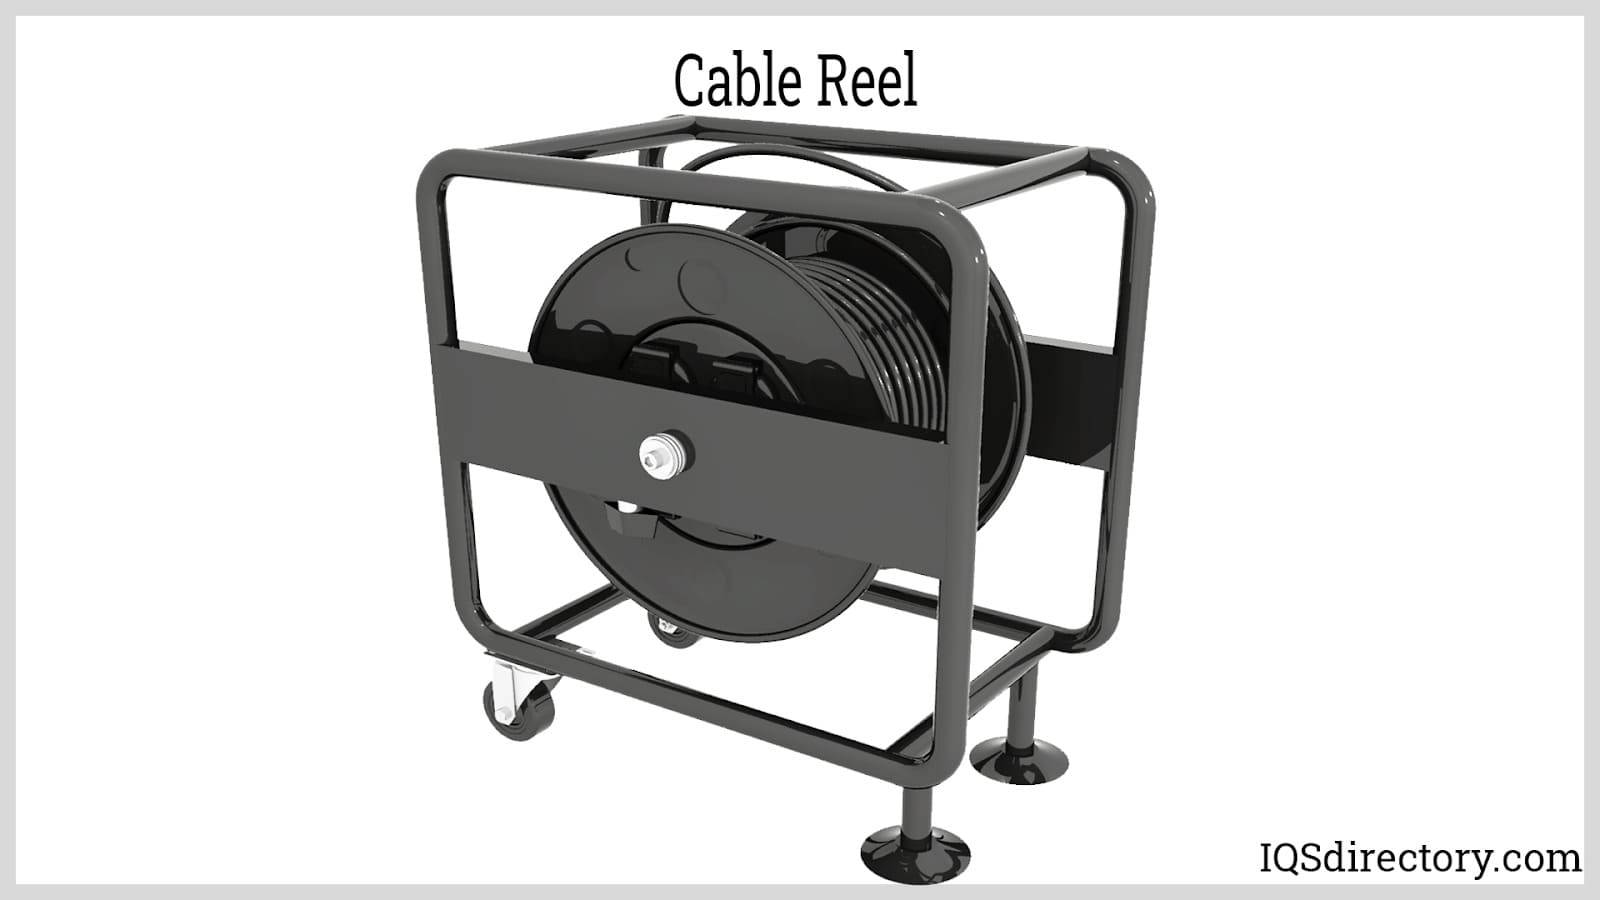 3 Wire Reels + 1 Steel Cable Caddy, Wire Dispenser Reels